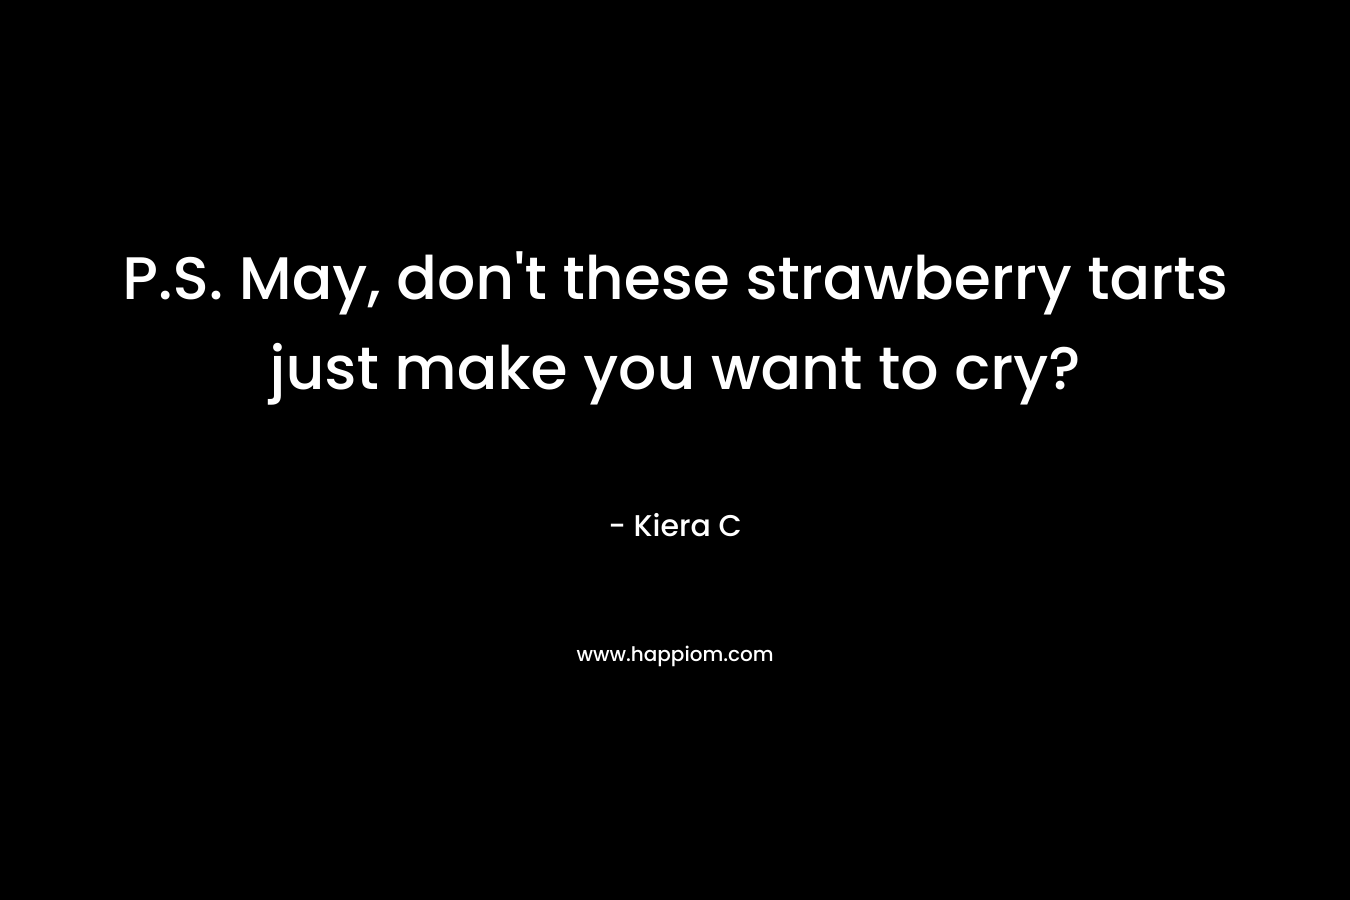 P.S. May, don’t these strawberry tarts just make you want to cry? – Kiera C